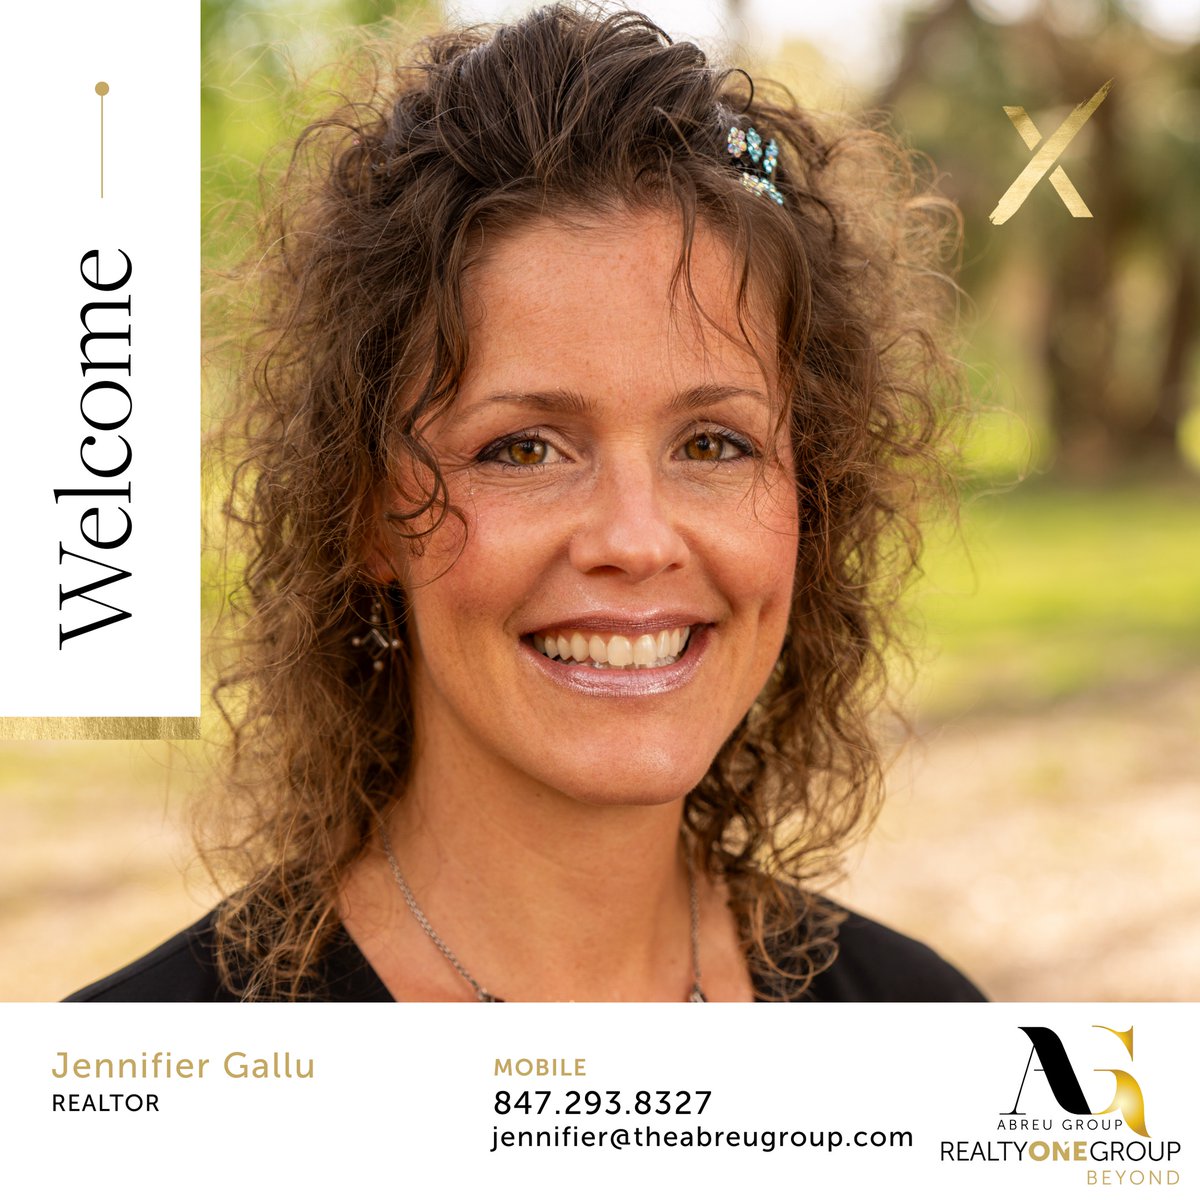 🌟 Welcome to the team, Jennifer Gallu! 🌟 Born and bred in the lively streets of Chicago, Jennifer brings a vibrant spirit and a love for diversity to our Belleair, FL community.   

#BelleairRealty #FloridaLiving #RealtyOneGroup #ROGBeyond #AbreuGroup